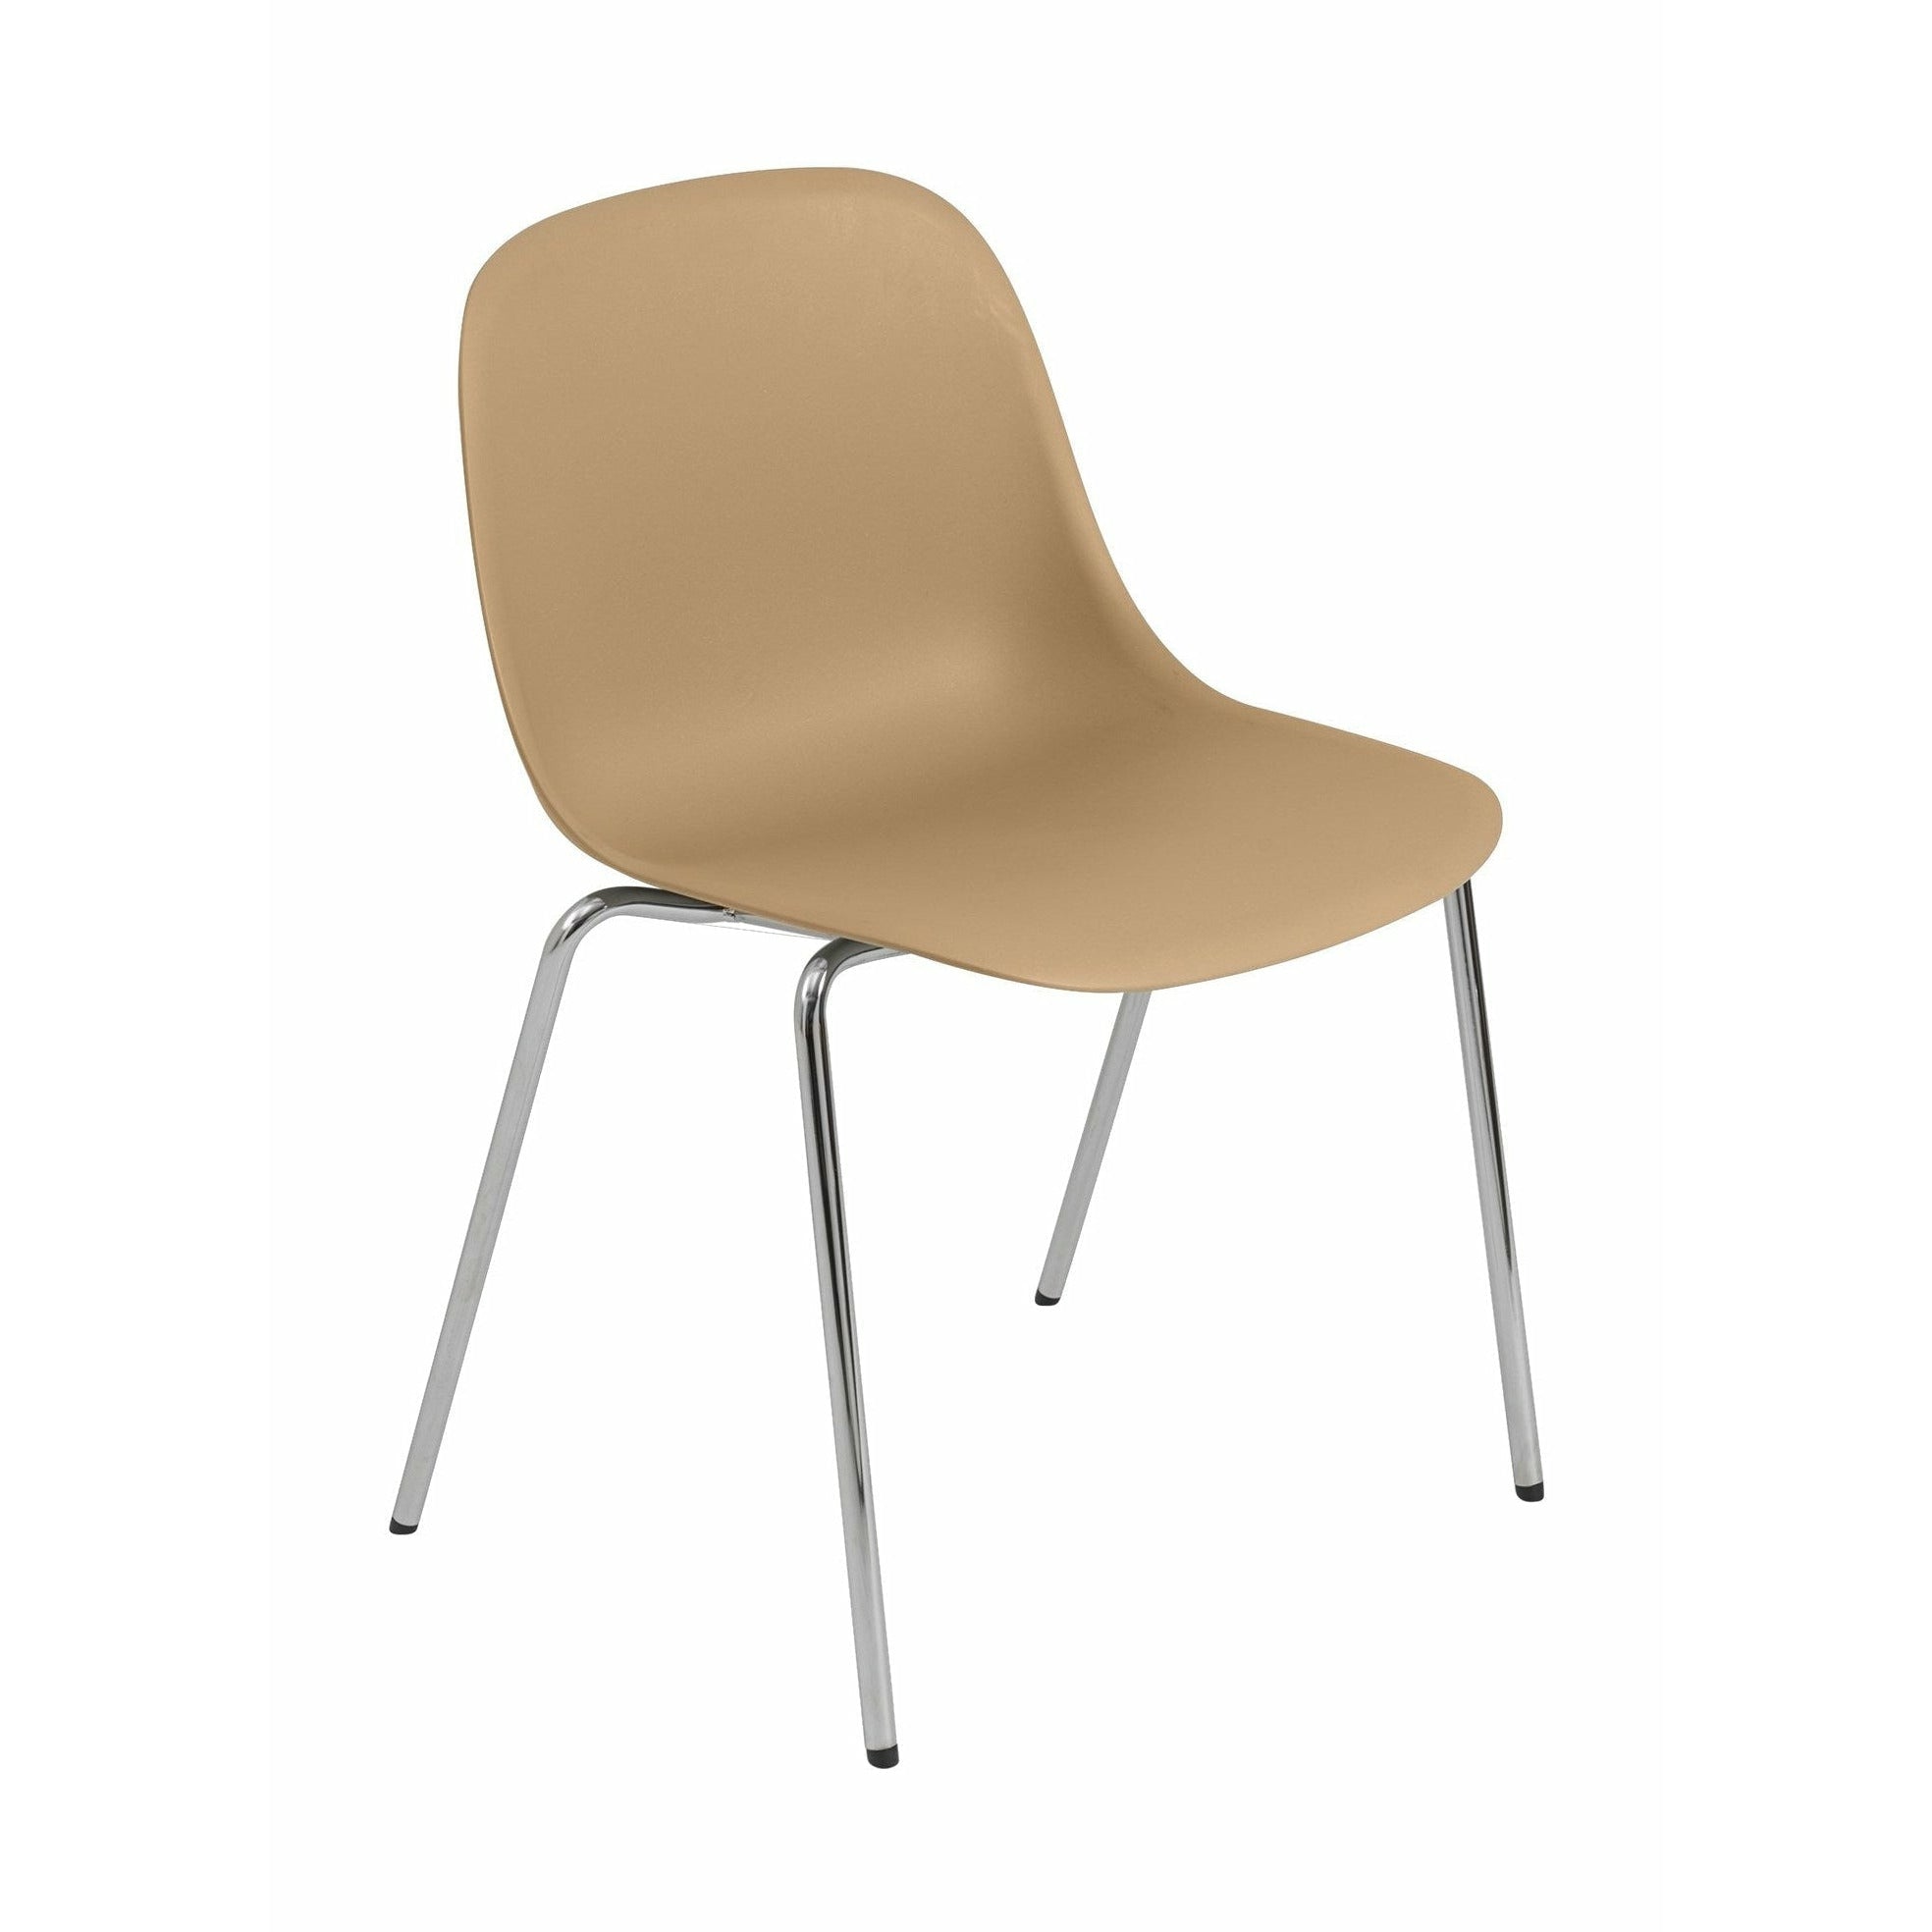 Muuto Fiber Side Chair Made Of Recycled Plastic A Base, Ochre/Chrome